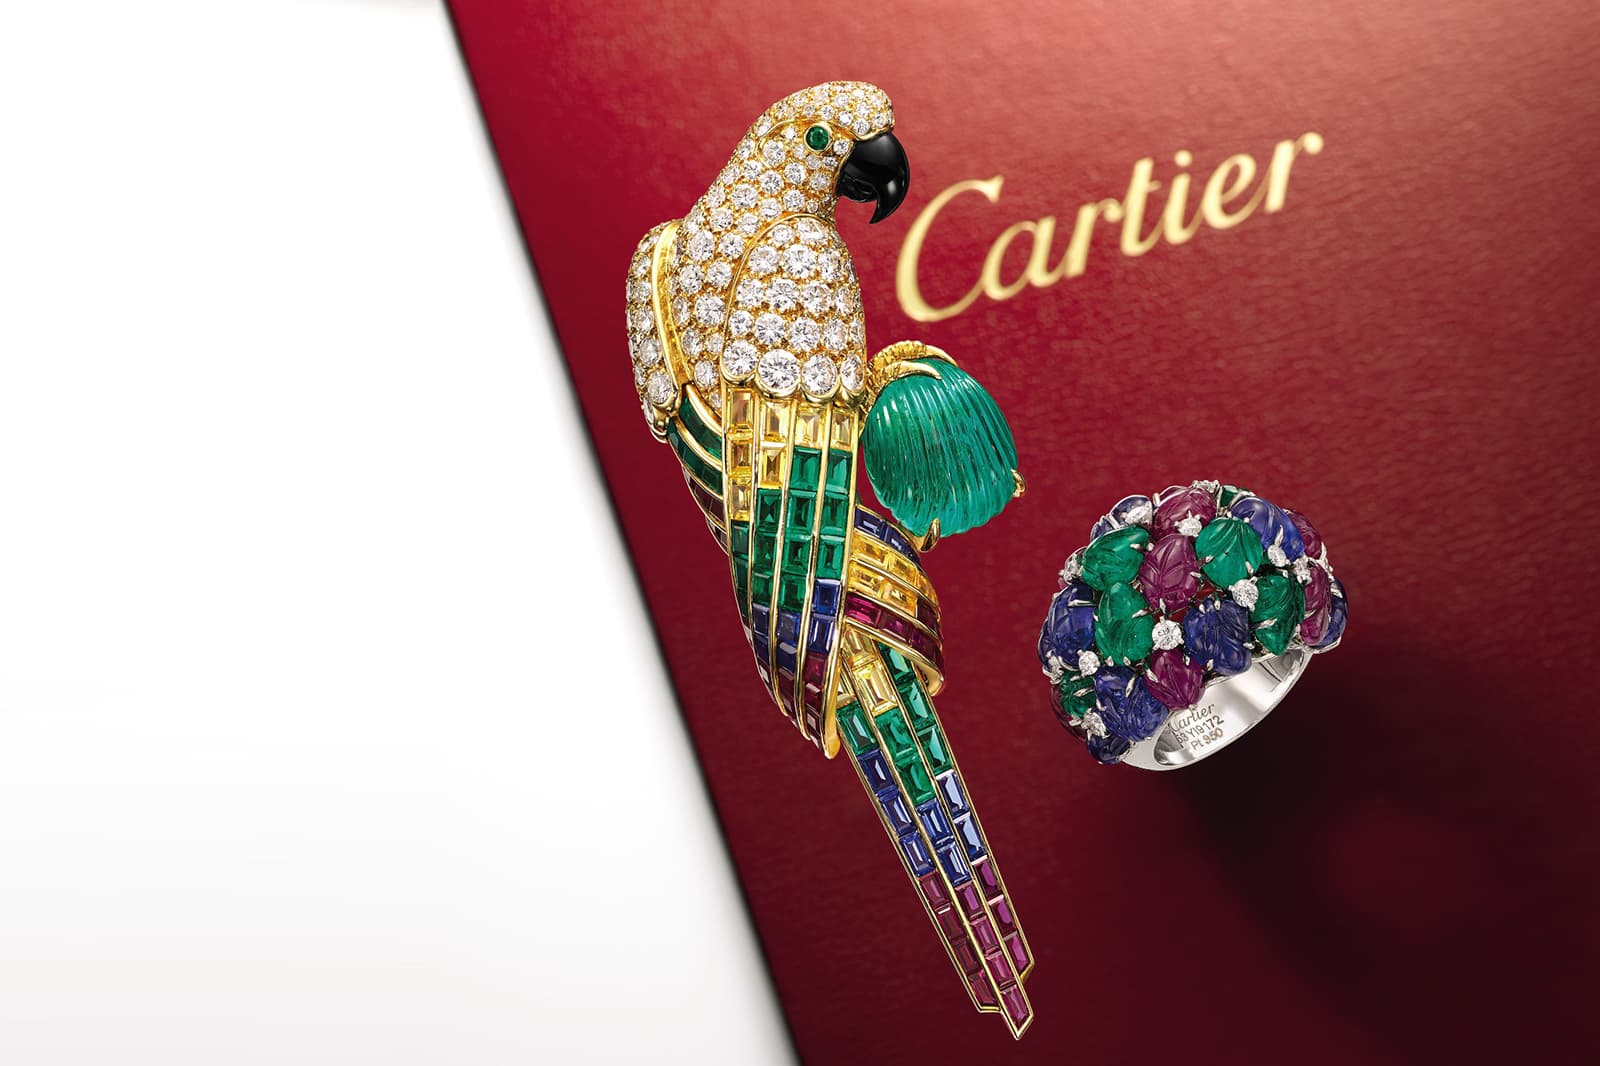 Cartier Tutti Frutti inspired parrot brooch and carved gemstone ring sold by Sotheby's